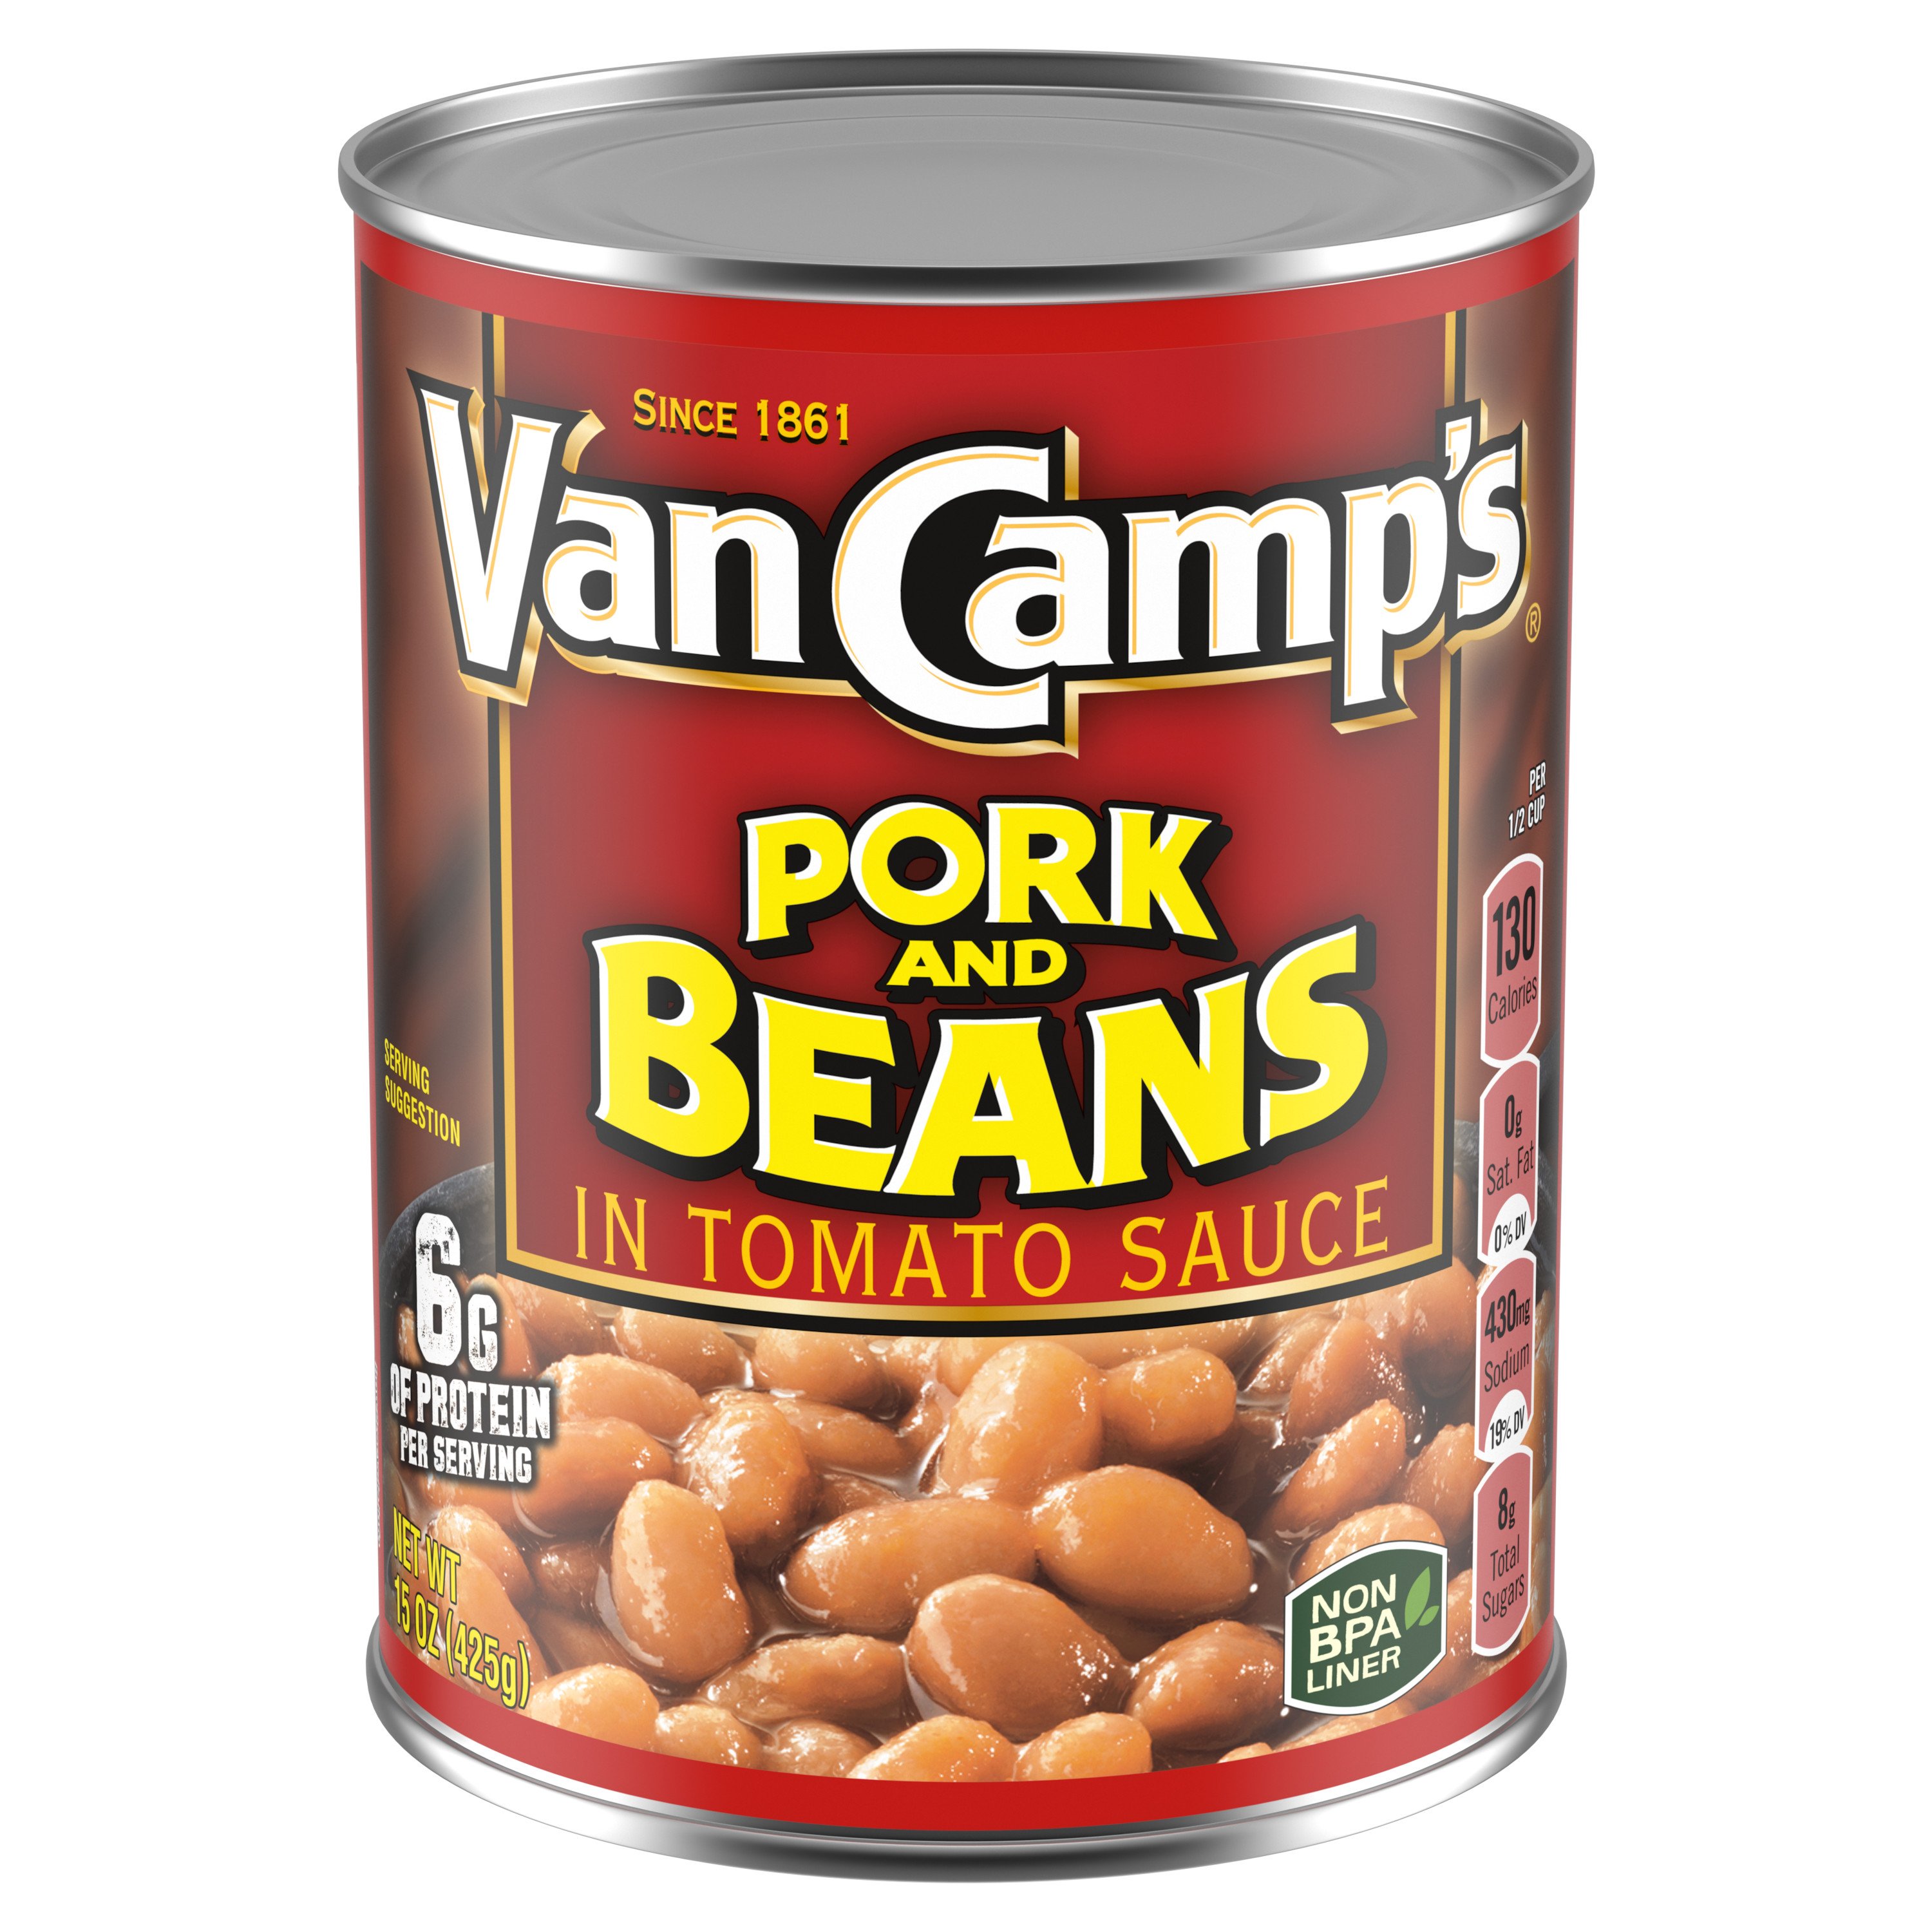 Van Camp's Pork and Beans in Tomato Sauce Shop Beans & Legumes at HEB